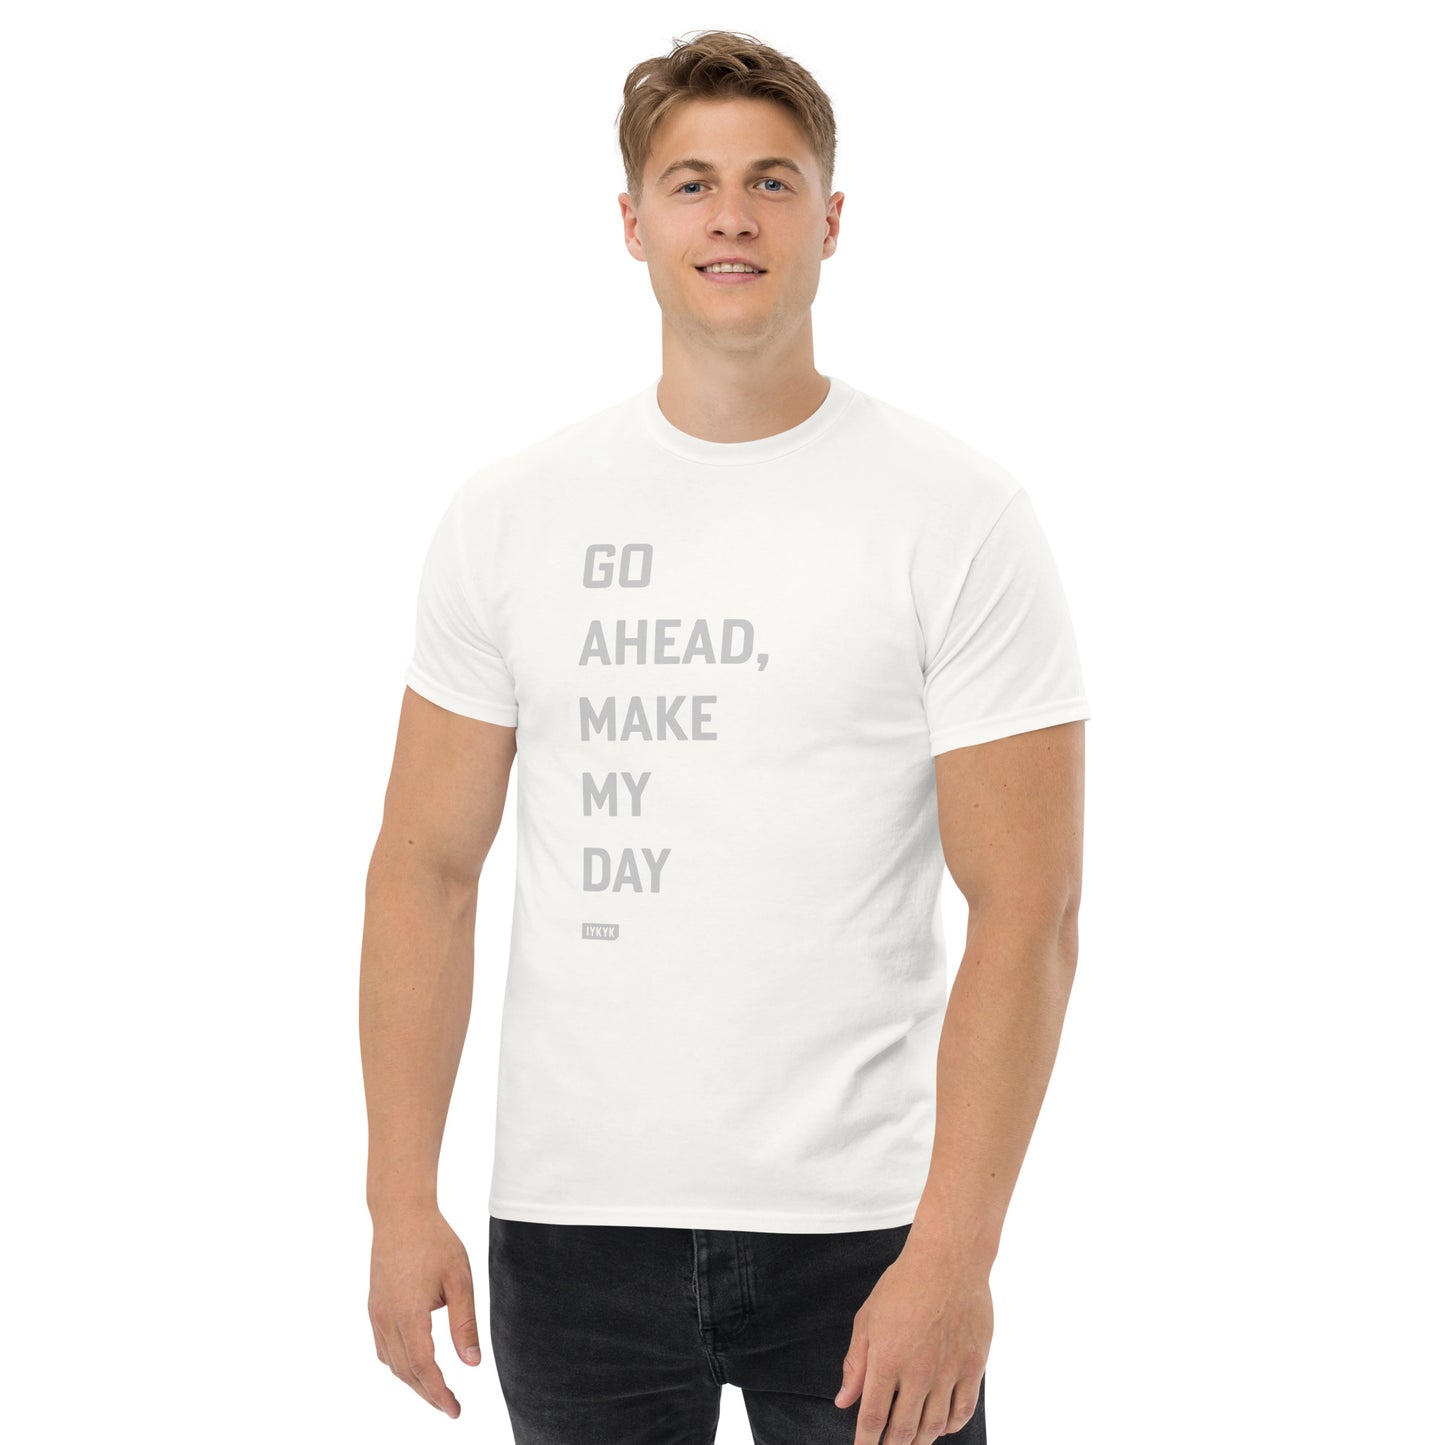 Classic Everyday Go Ahead, Make My Day Clint Eastwood Tee